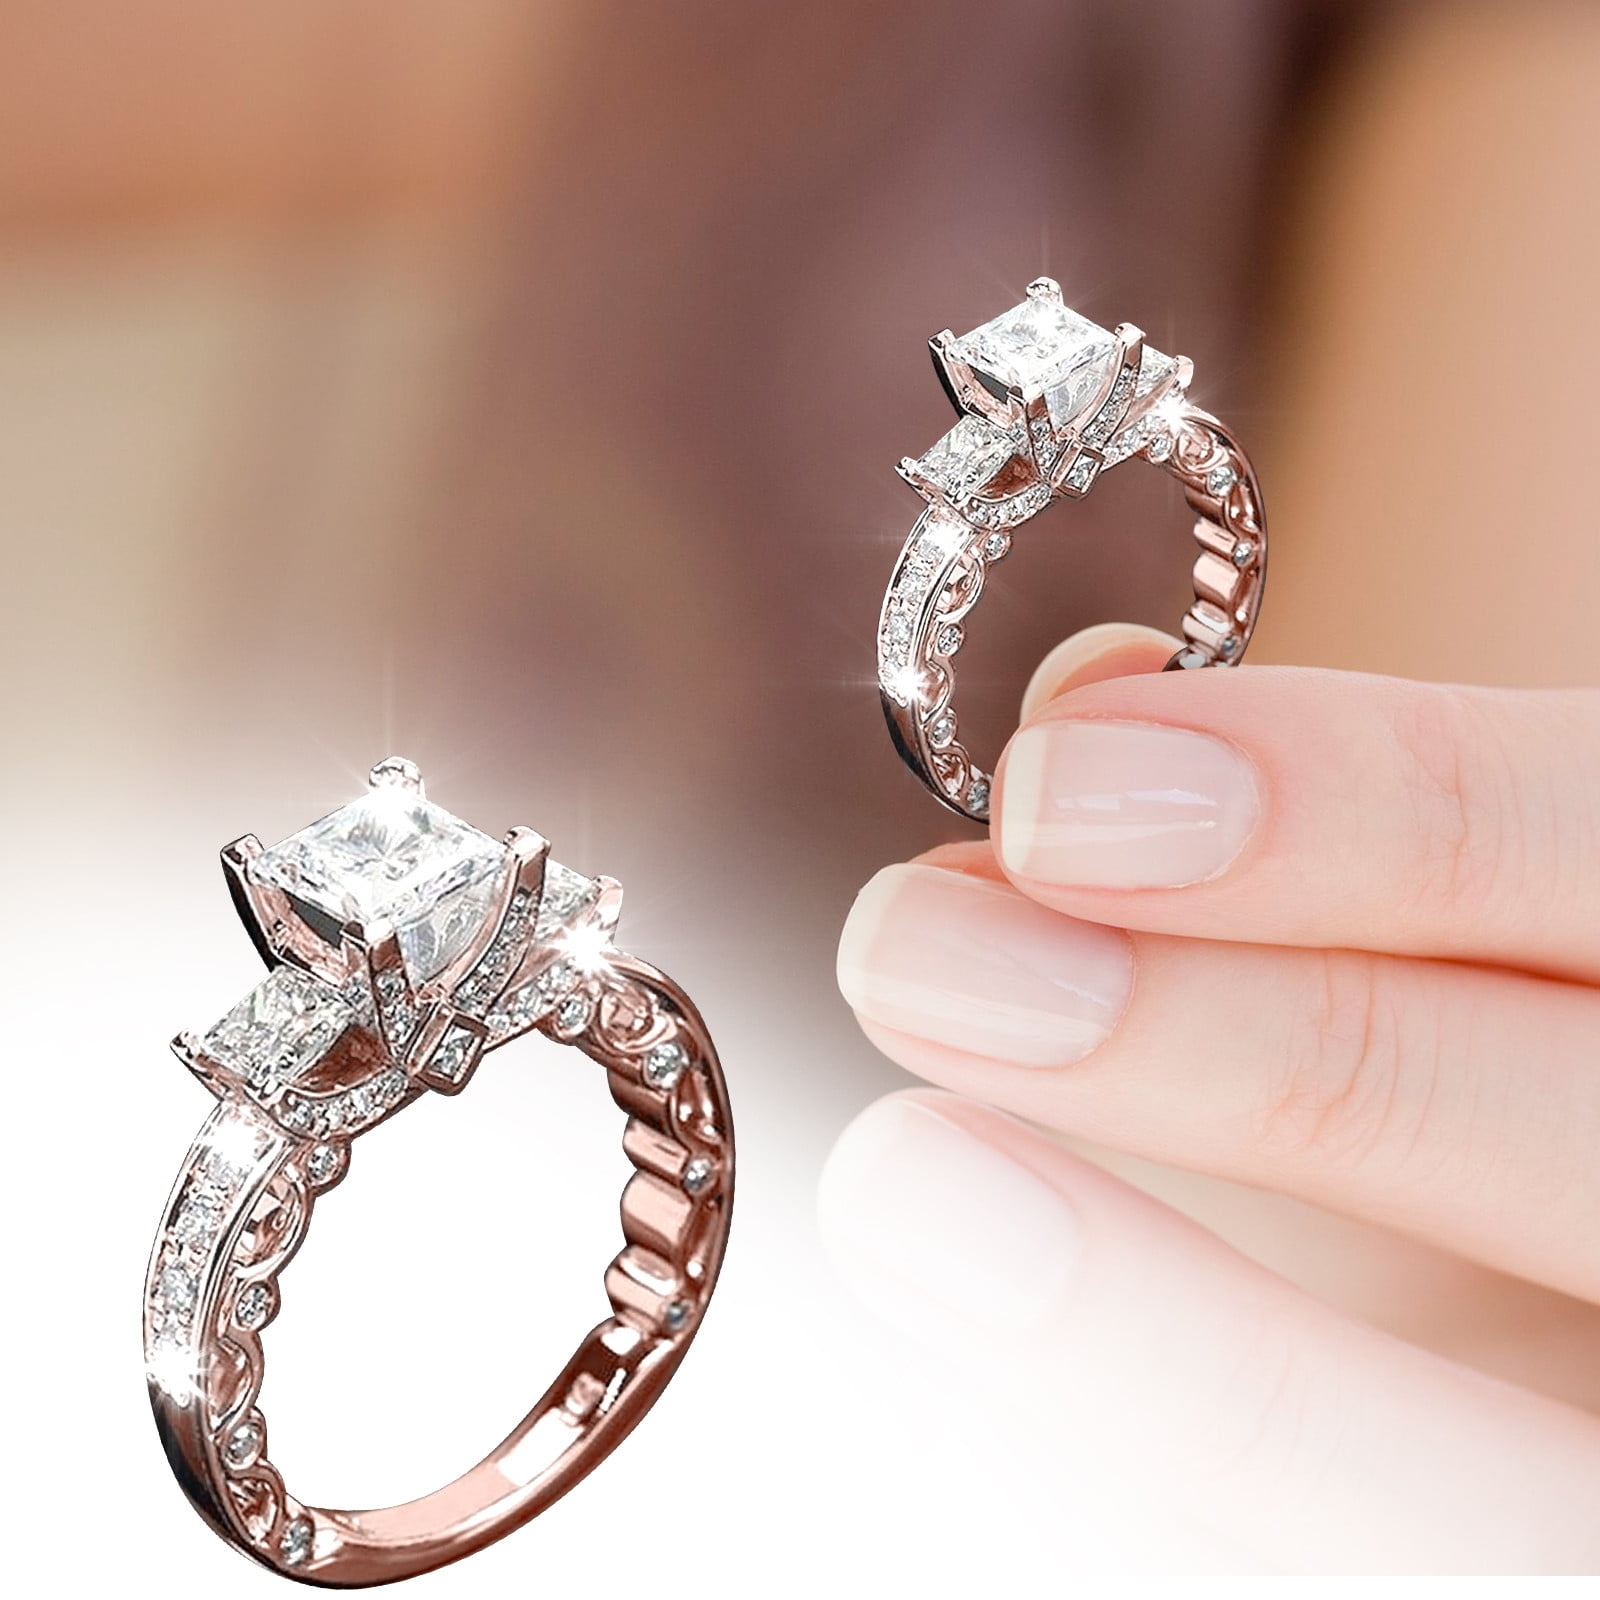 Dainty Zircon Crystal Rings for Women Girls Simple Wedding Rings Charm  Lover Couple Ring Finger Jewelry Anillos Mujer Gift - buy at the price of  $0.48 in aliexpress.com | imall.com